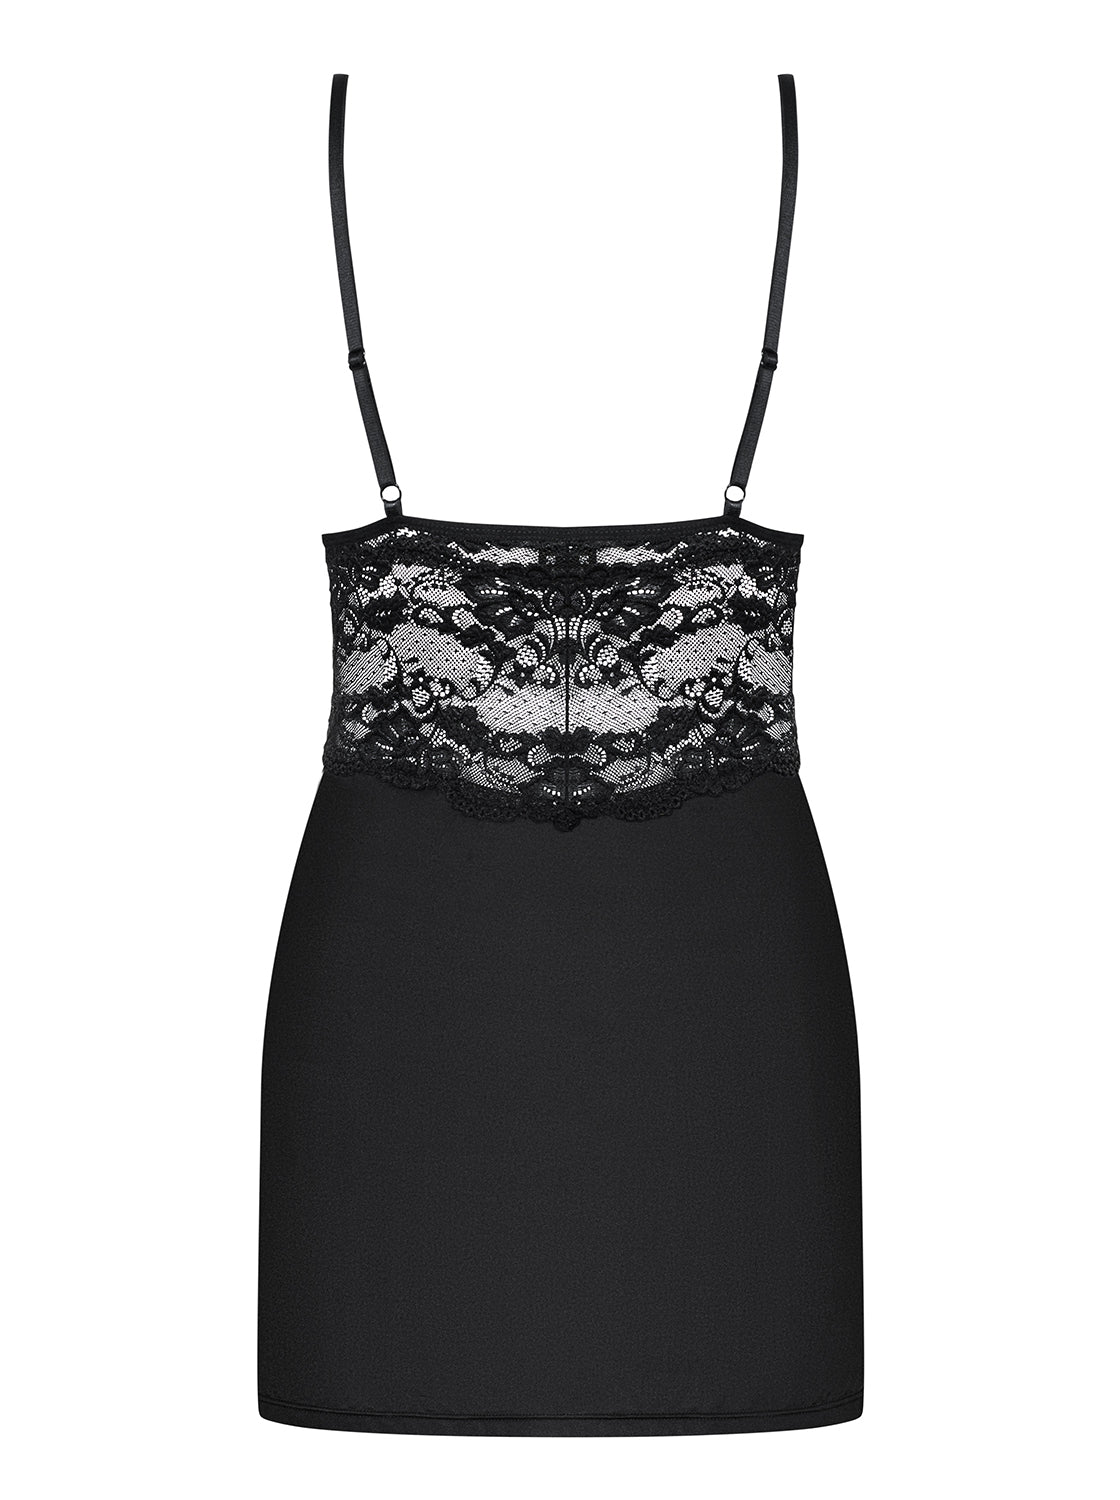 Enticing Lace Black Chemise and Thong Set